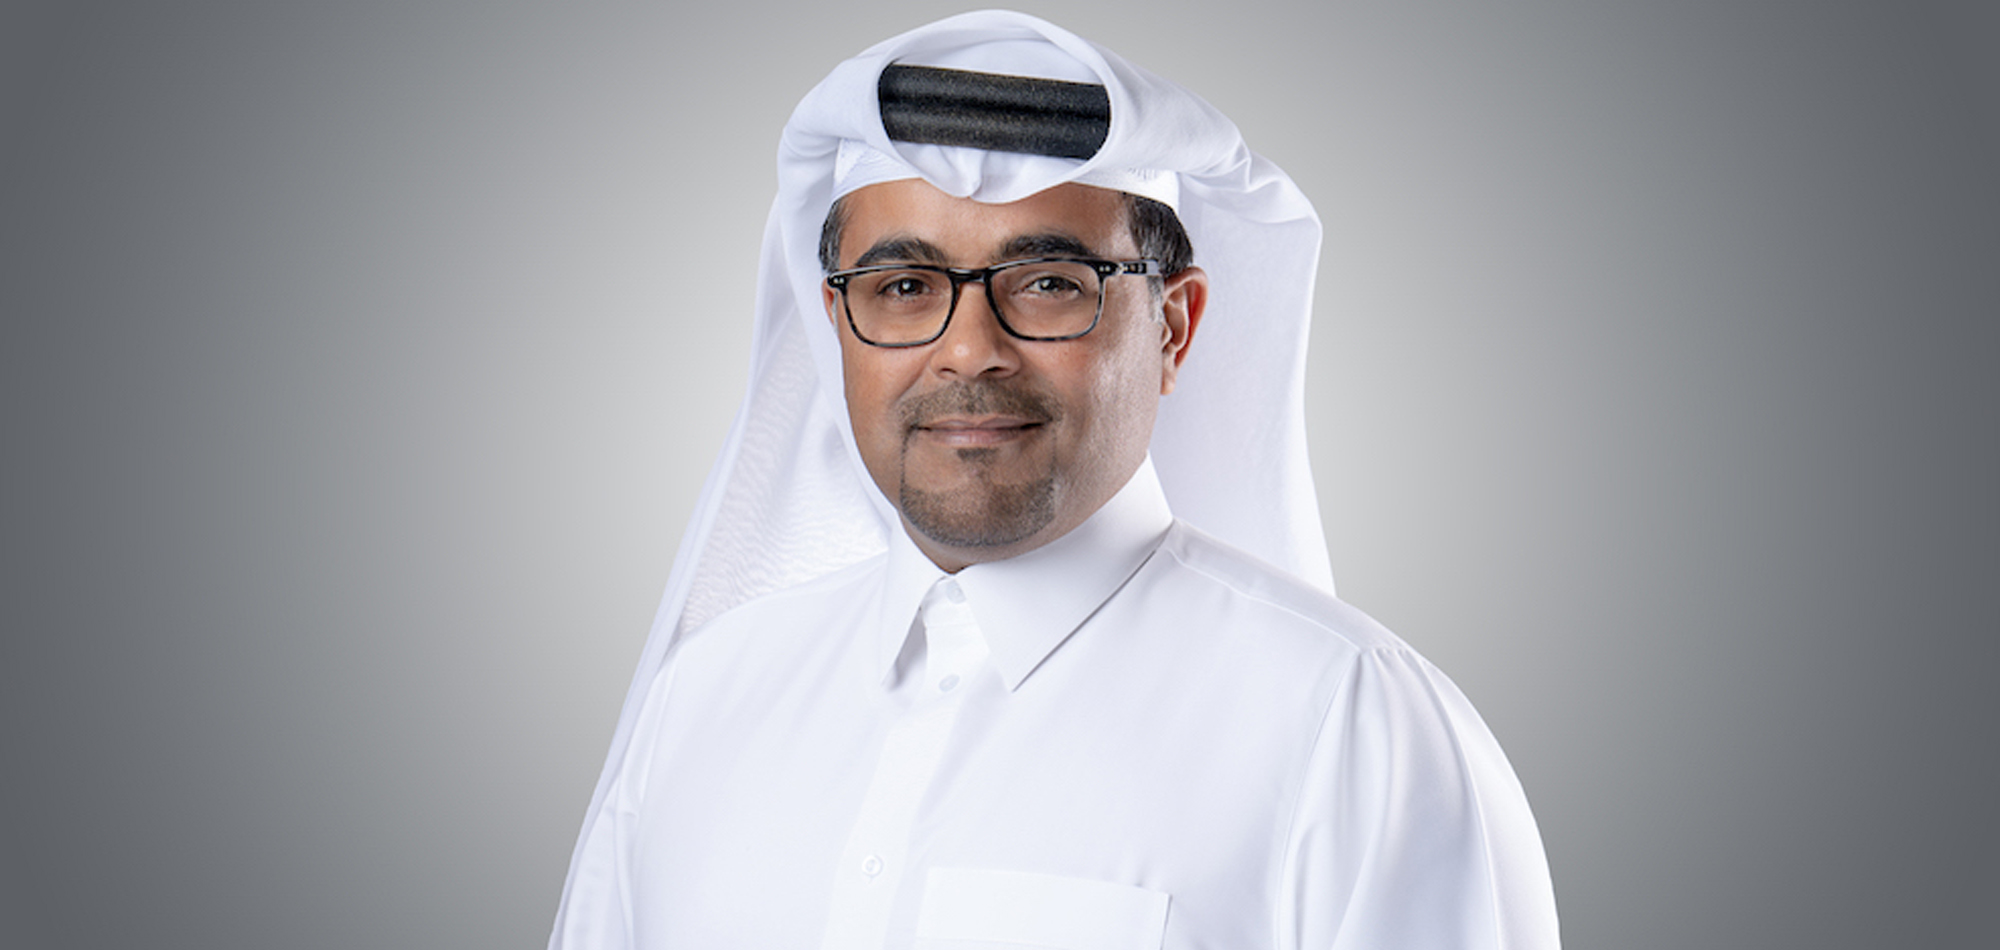 QMMF President: Doha Provided a Special Experience in Hosting Formula 1